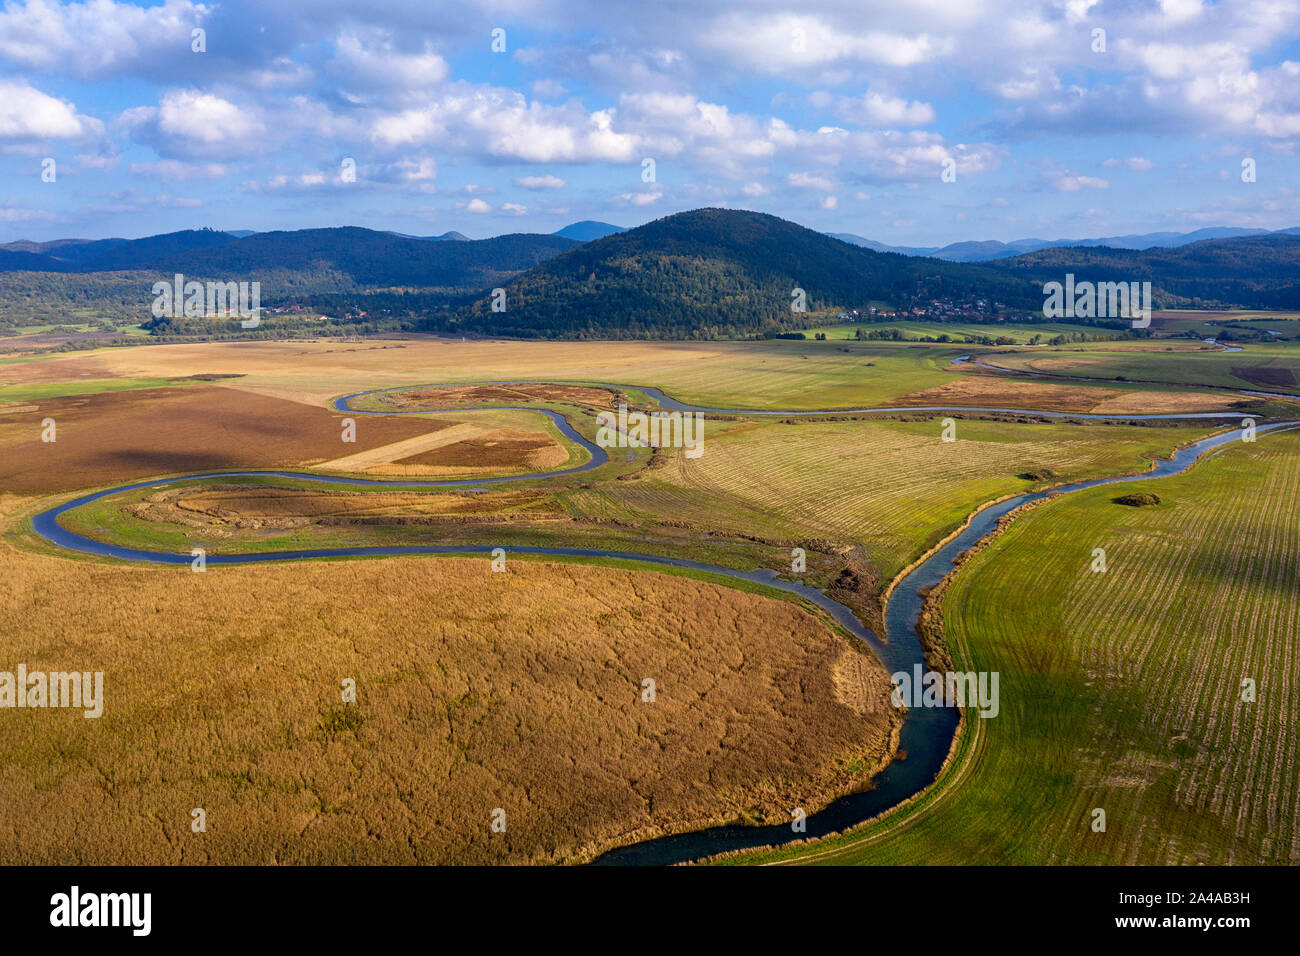 Top scenic Aerial view of tributary that flows into Cerknica Lake, Slovenia Stock Photo